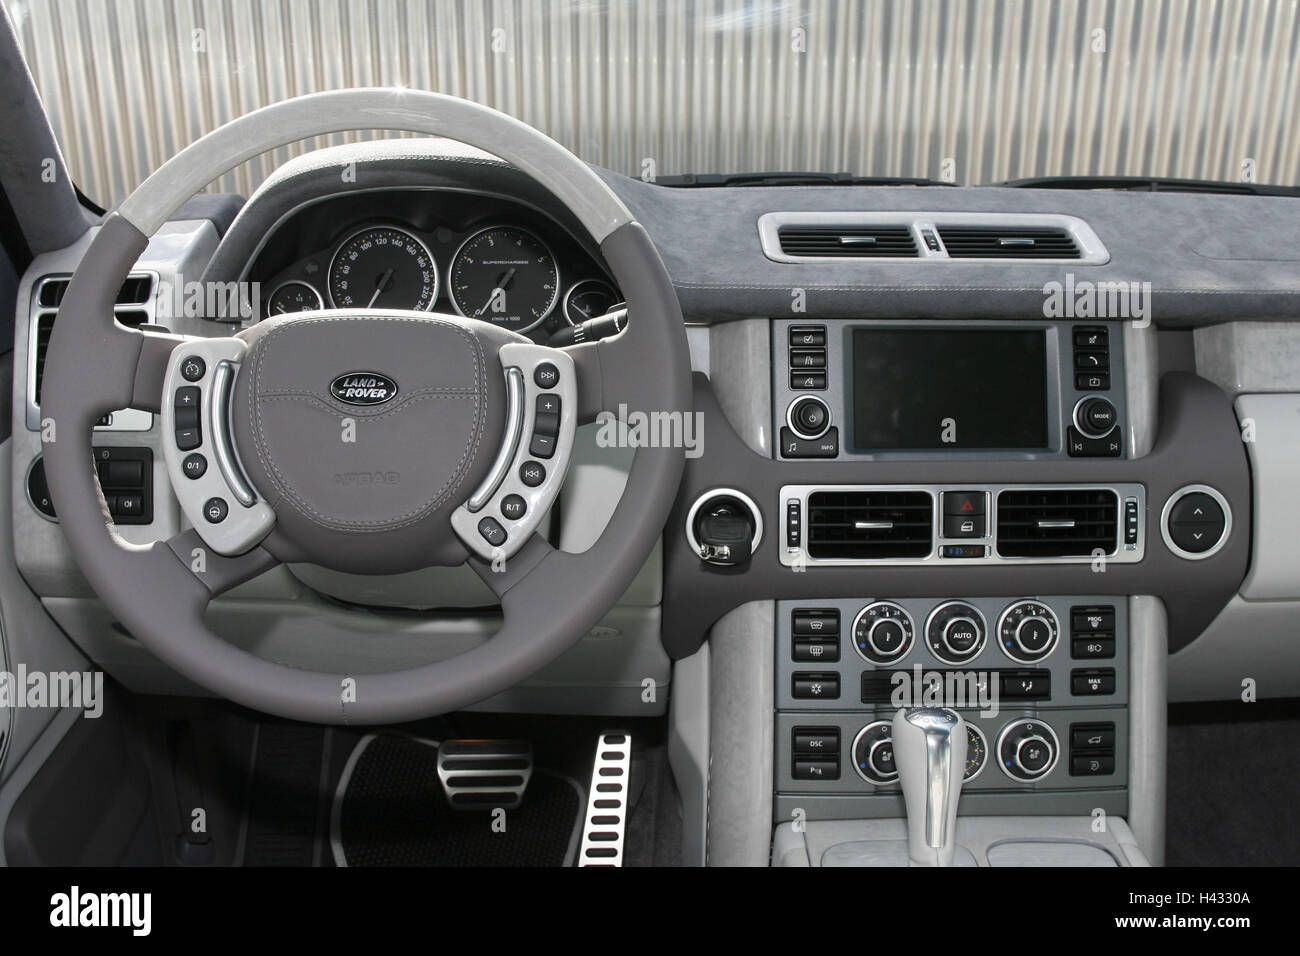 Range rover interior hi-res stock photography and images - Alamy